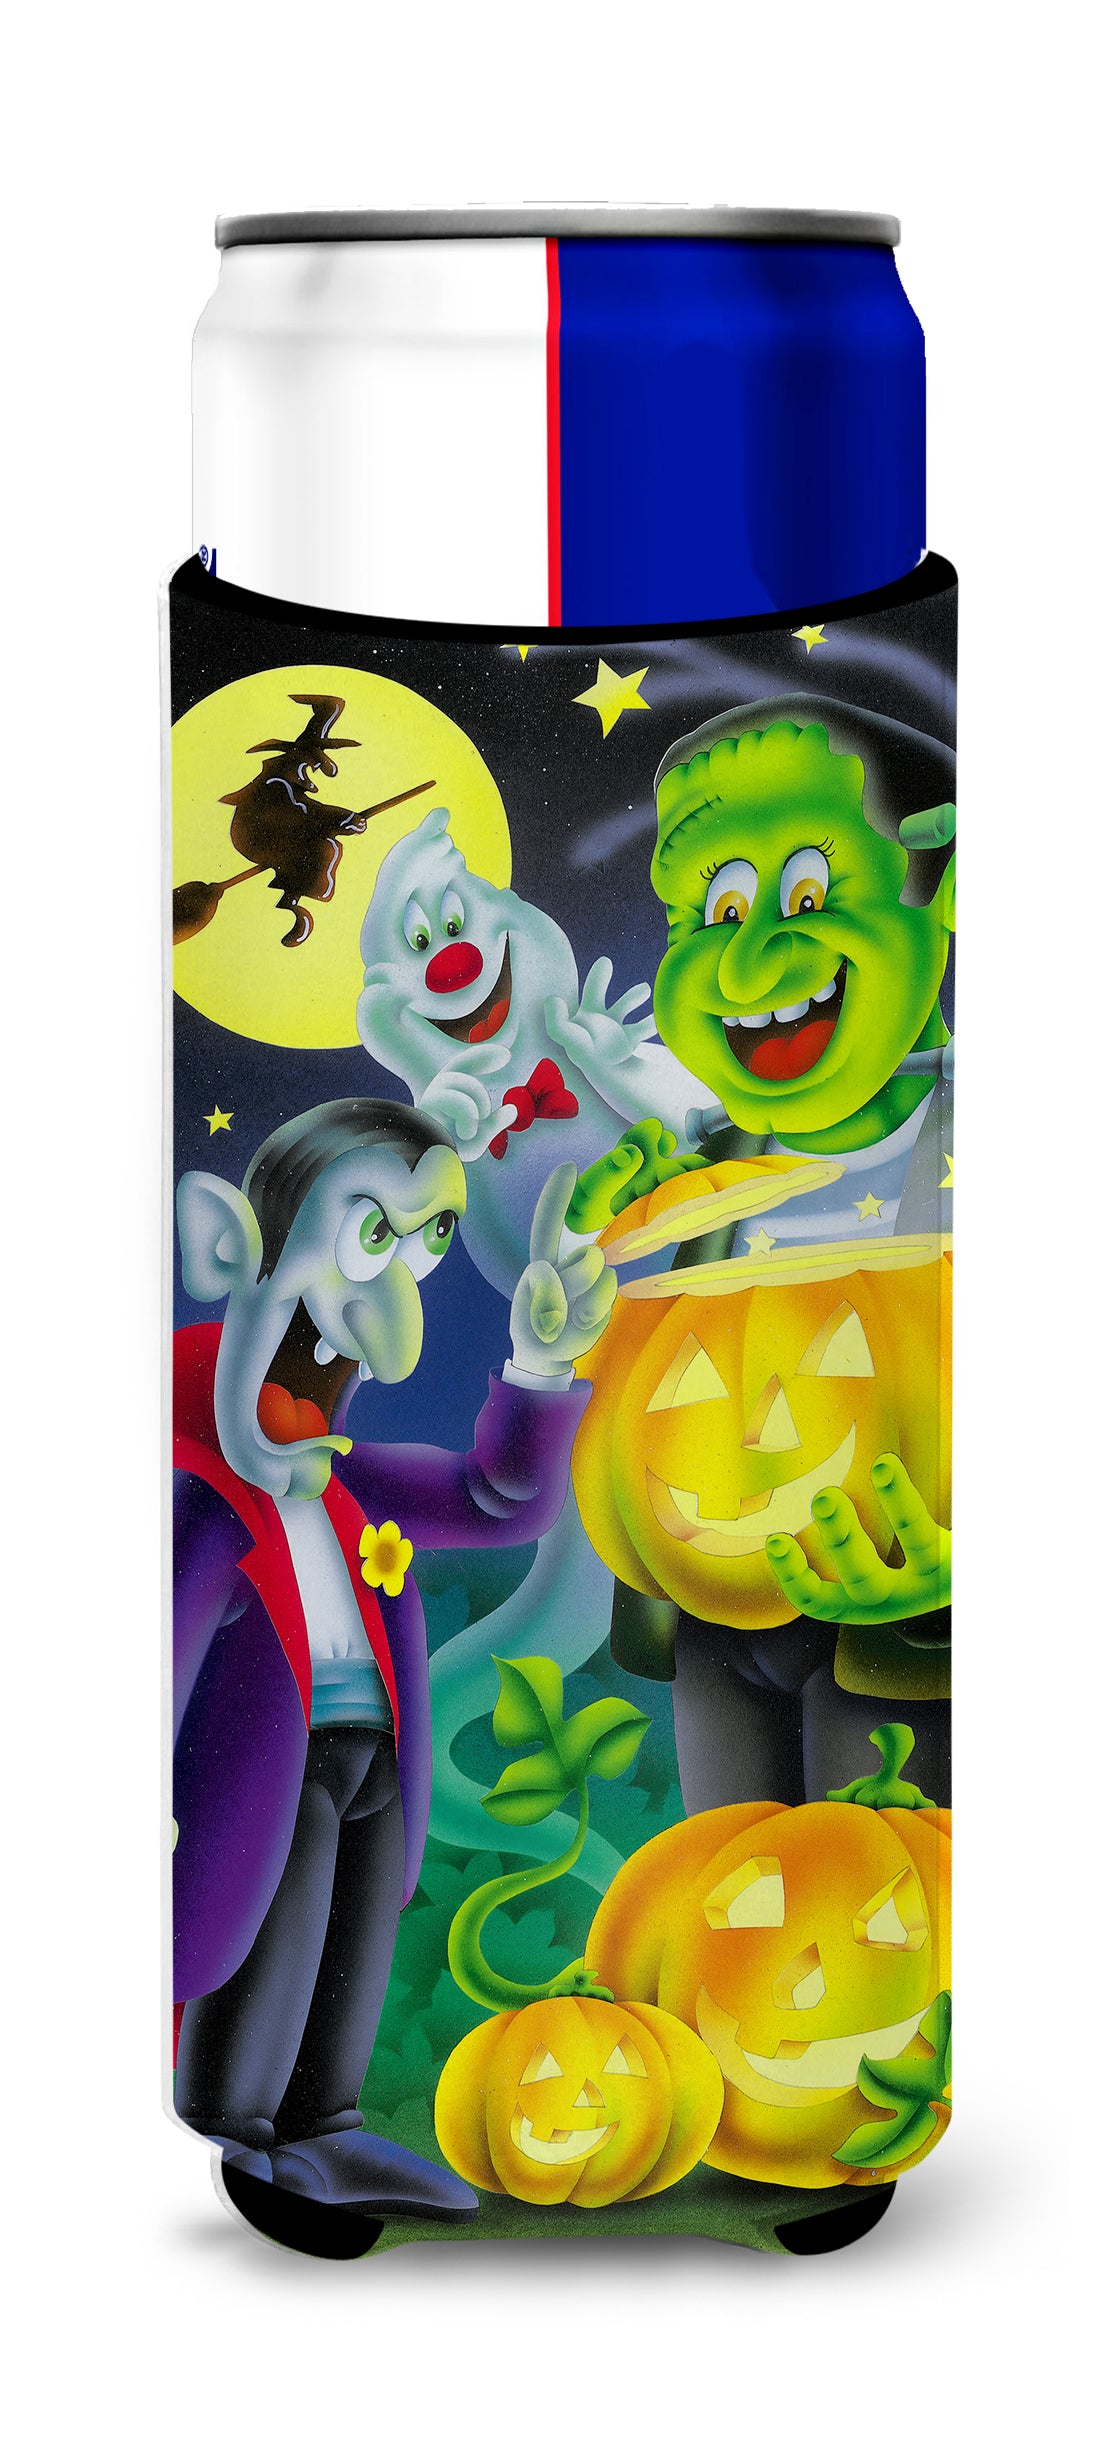 Halloween with Dracula and Frankenstein Ultra Beverage Insulators for slim cans APH0935MUK